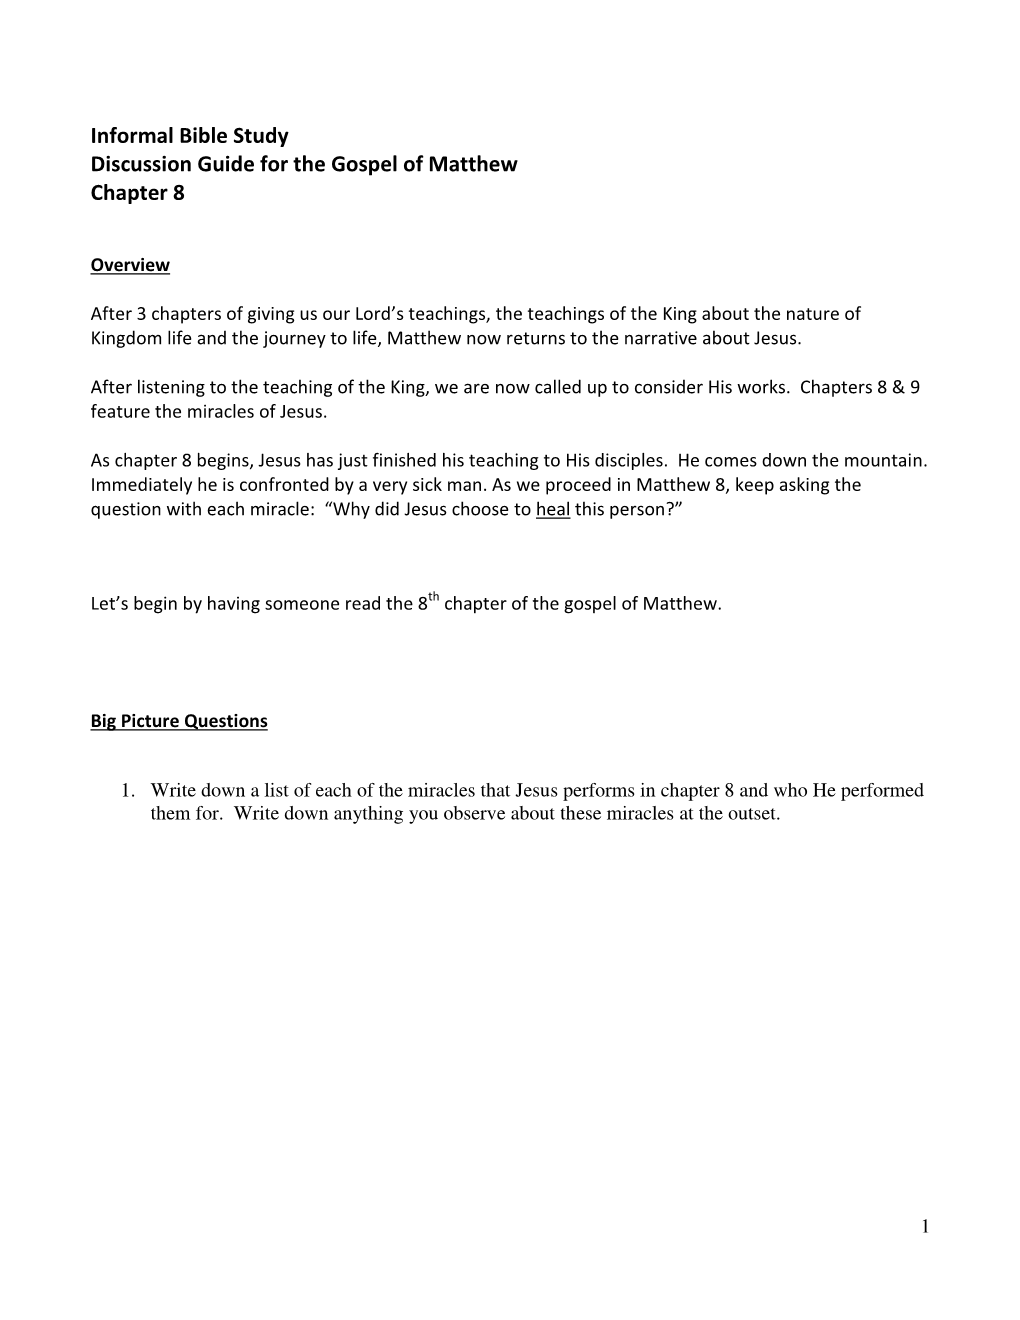 Informal Bible Study Discussion Guide for the Gospel of Matthew Chapter 8